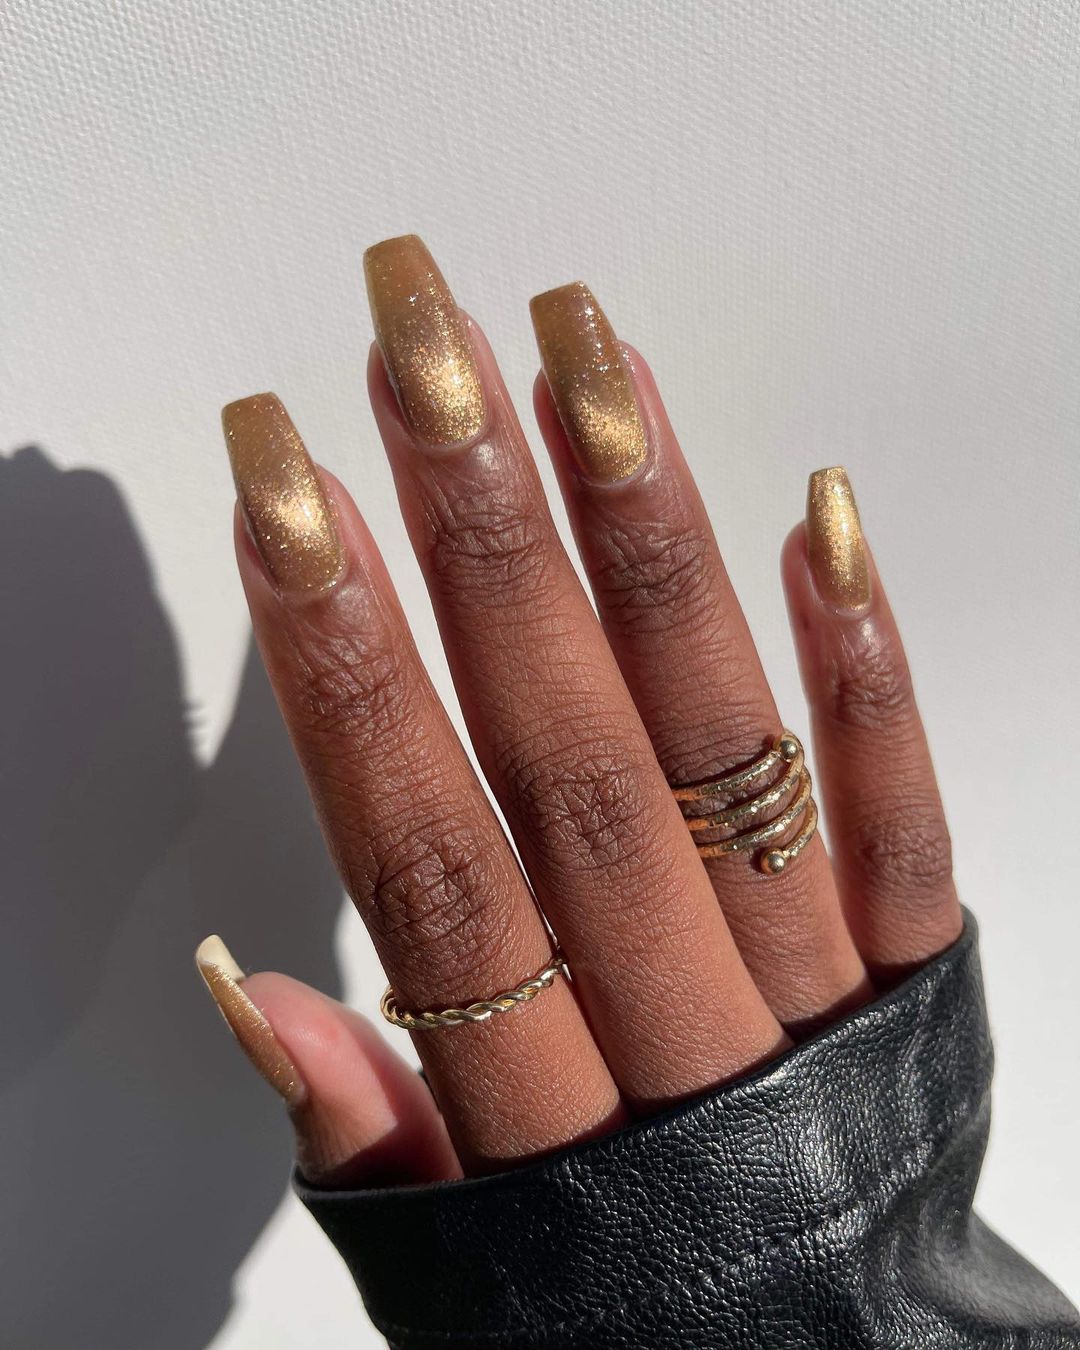 27 Ideas for Fall Nail Colors for Dark Skin 2024